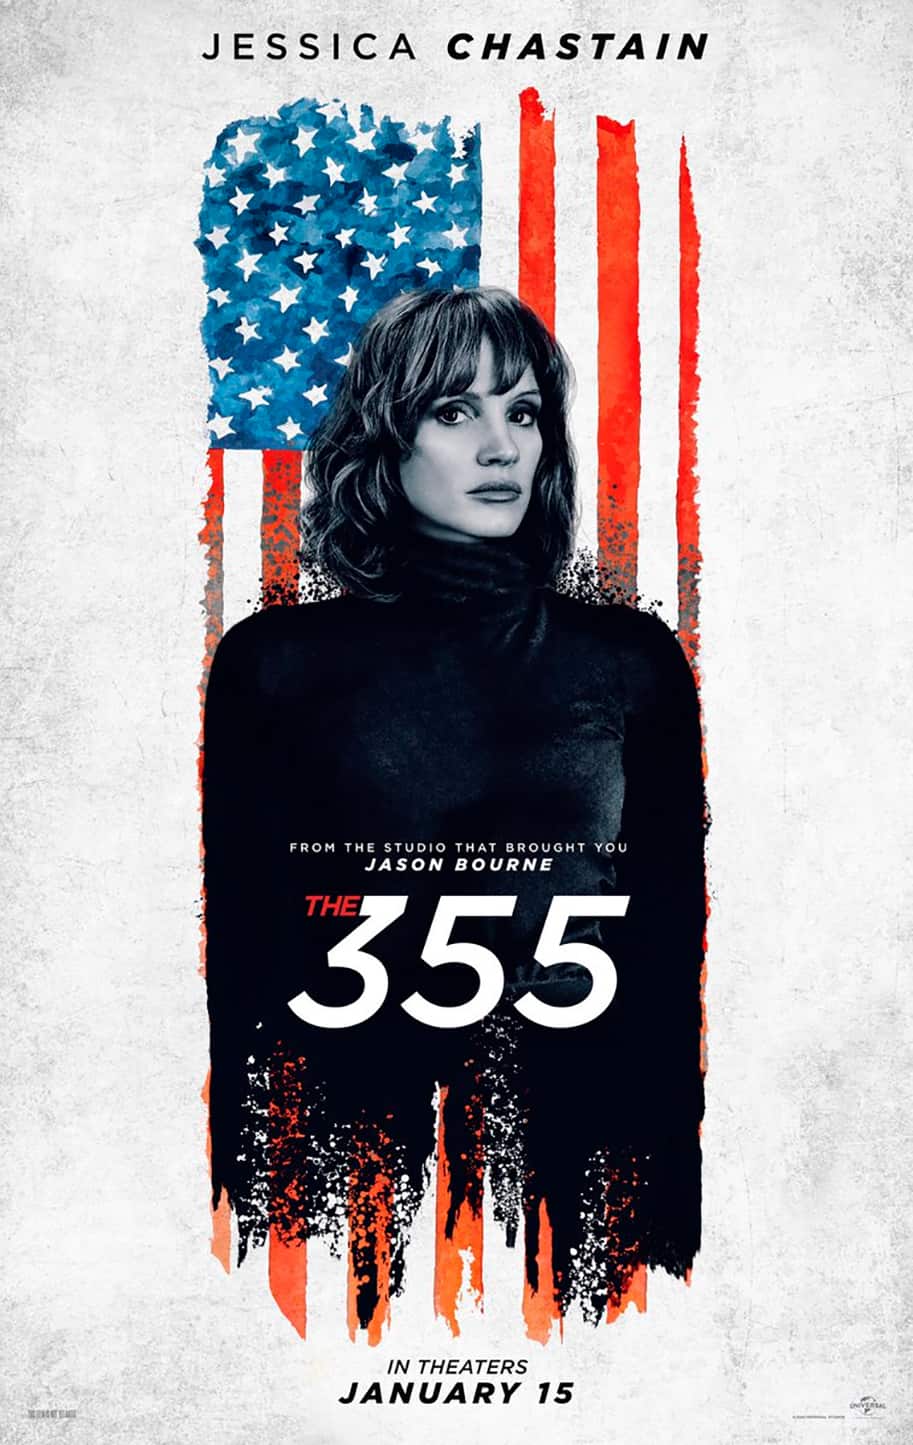 The 355 | Jessica Chastain in Action - Film